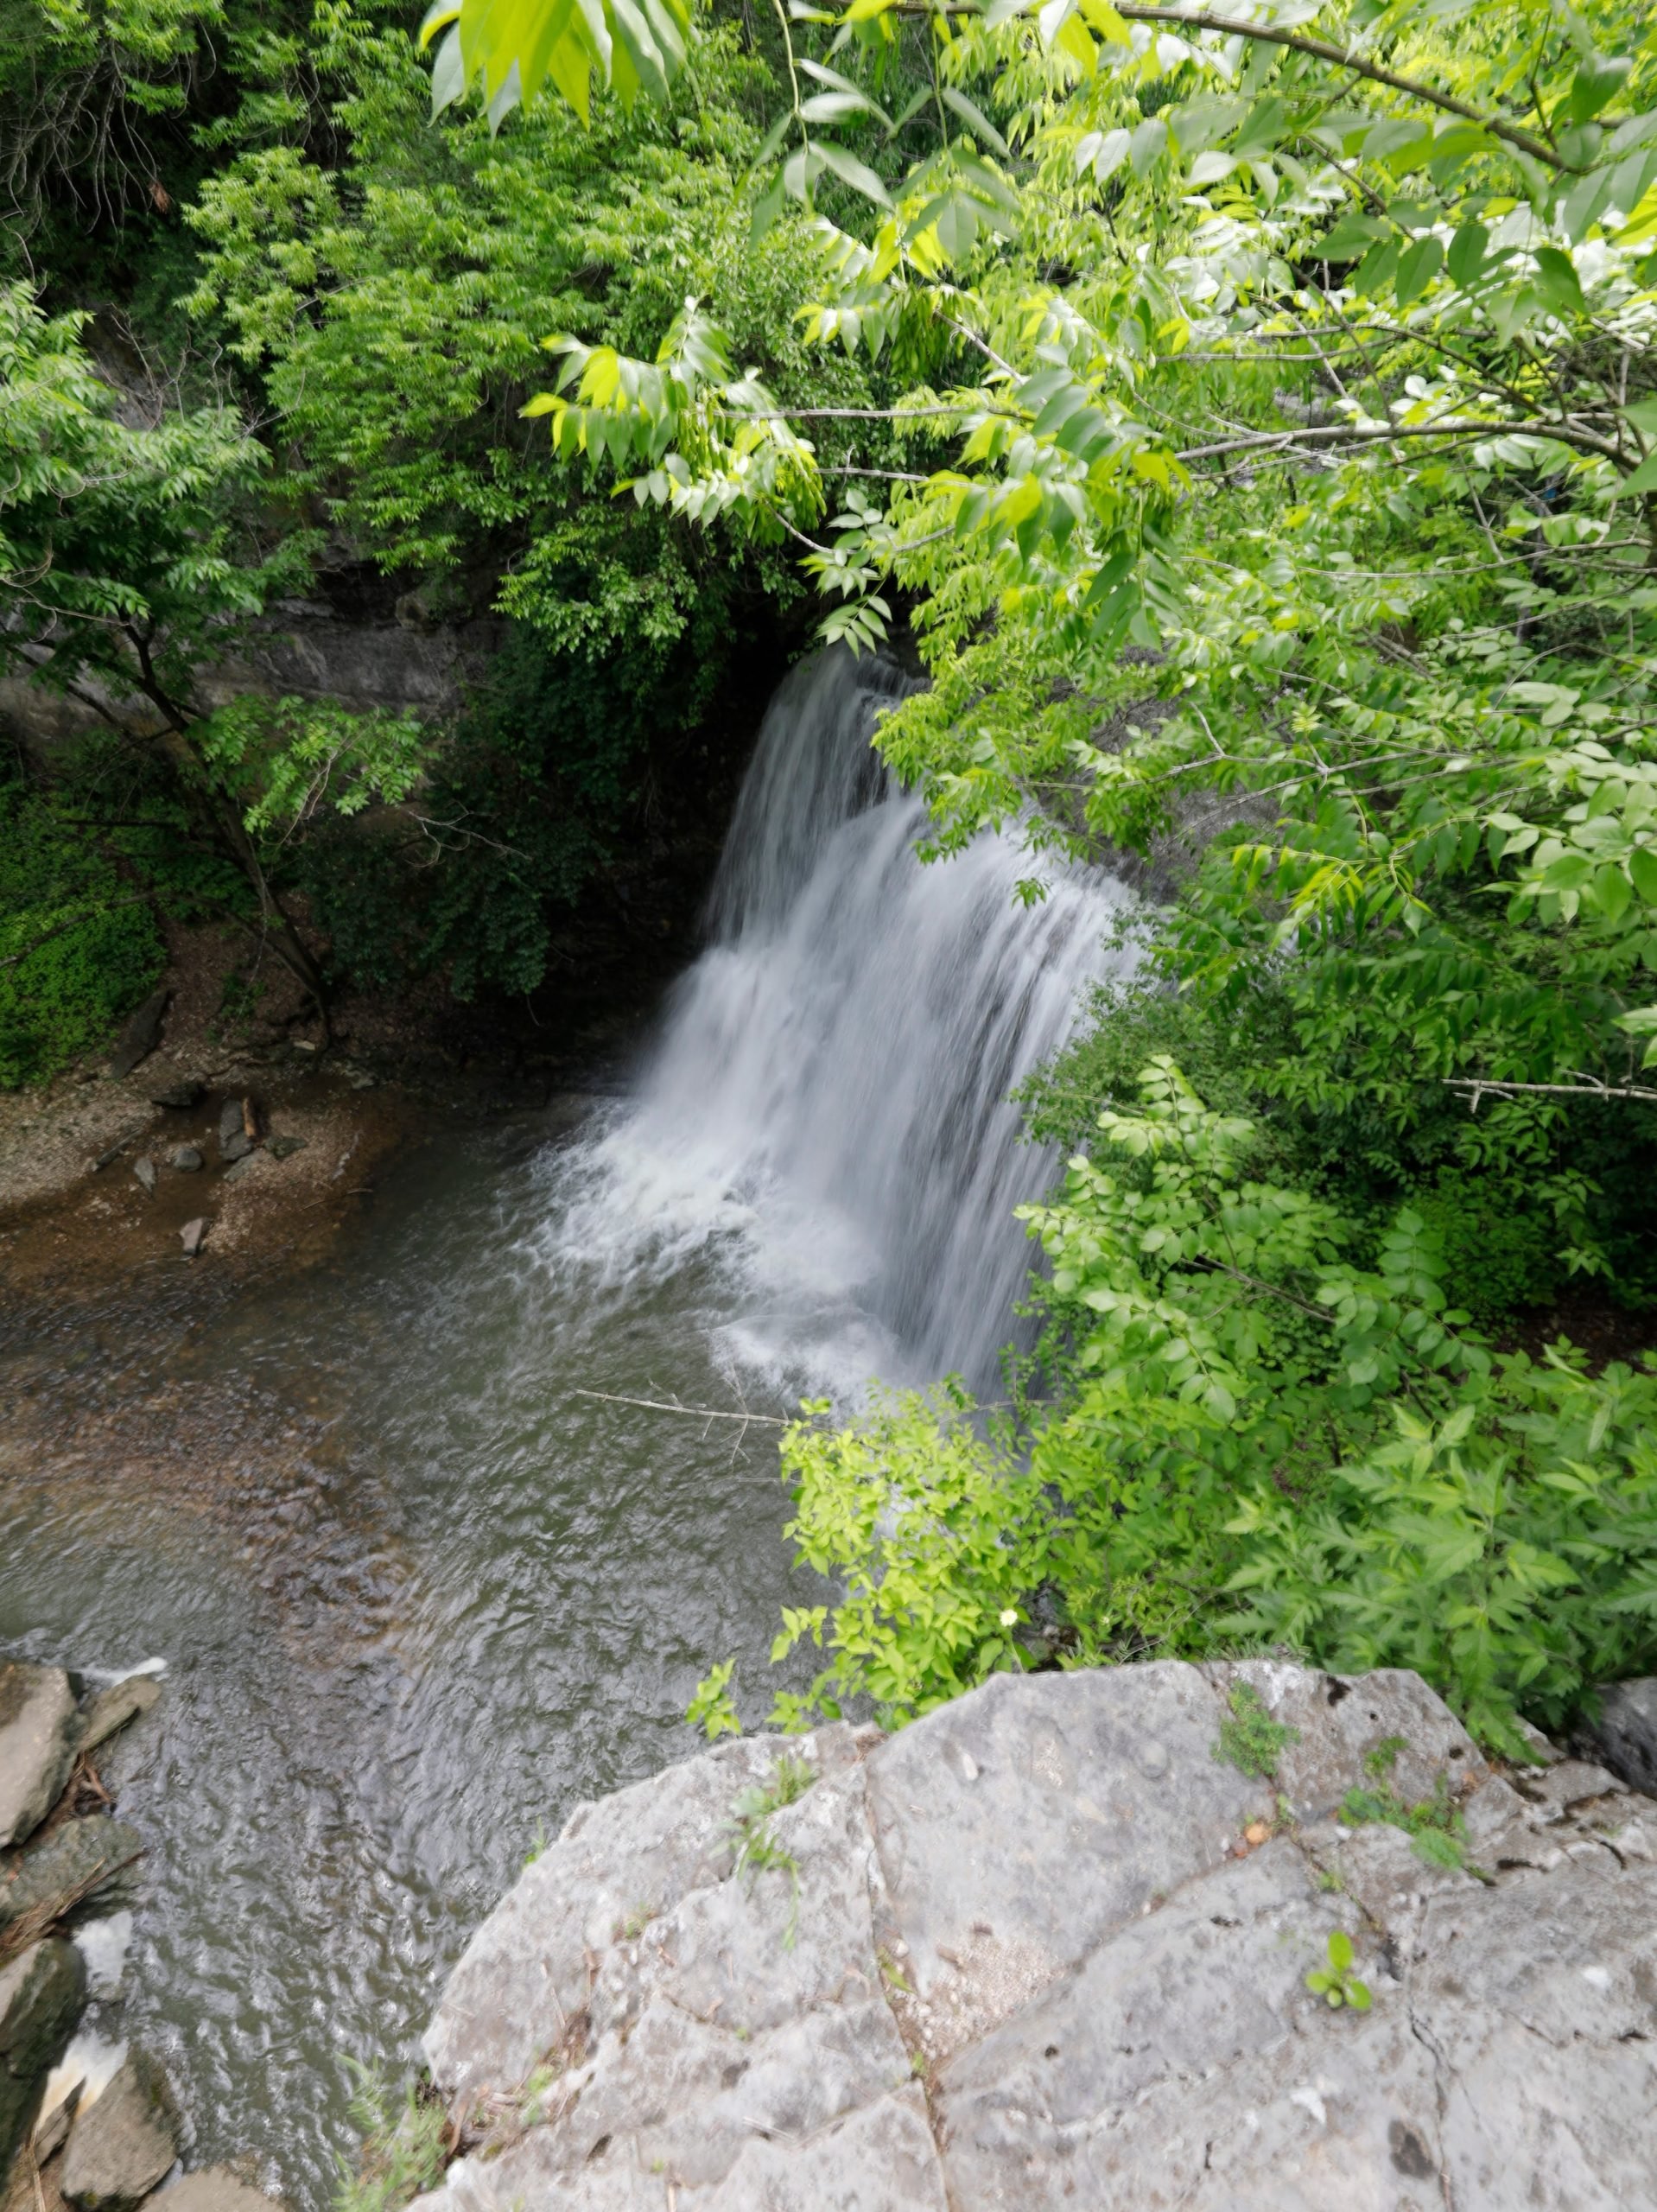 View of Hayden Run falls from above